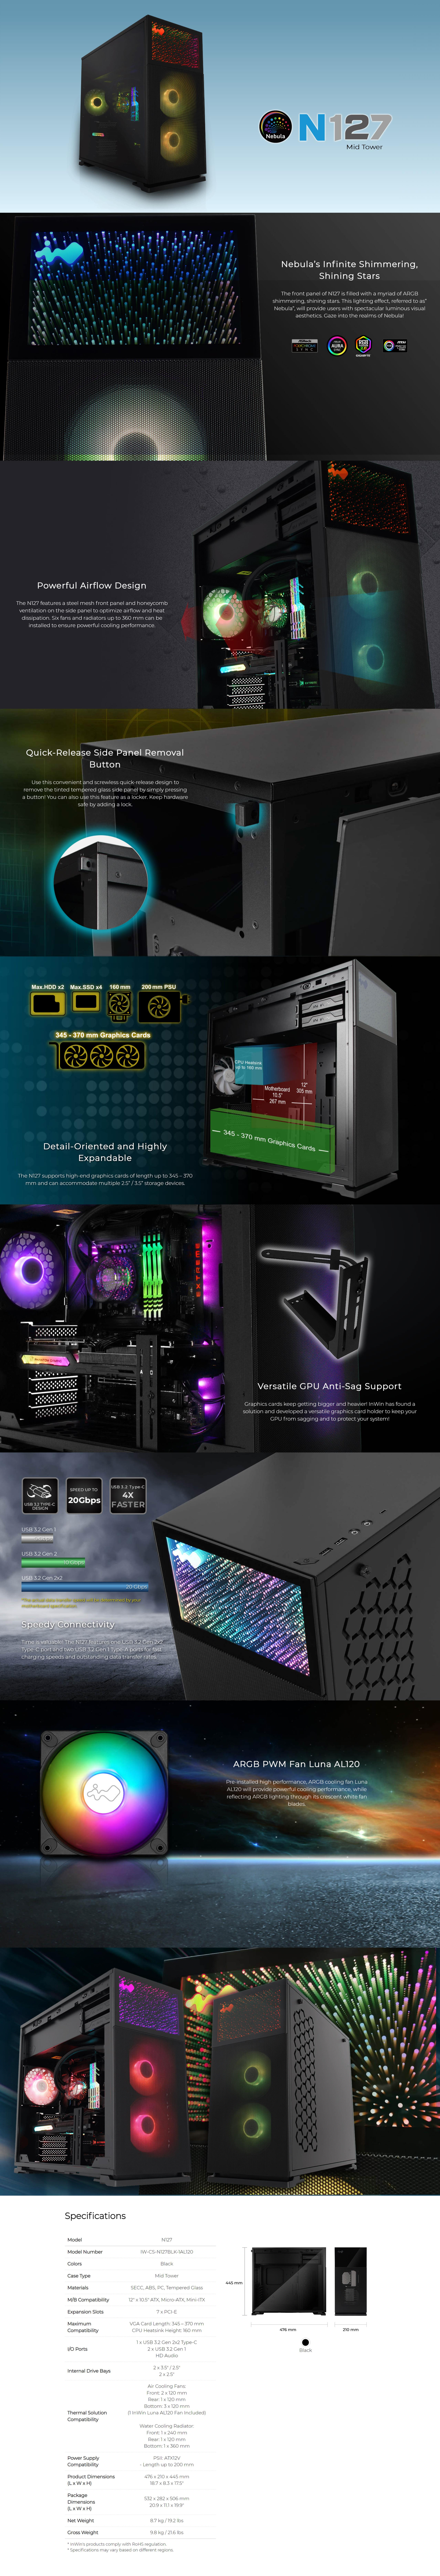 A large marketing image providing additional information about the product InWin N127 Nebula ARGB Mid Tower Case - Additional alt info not provided